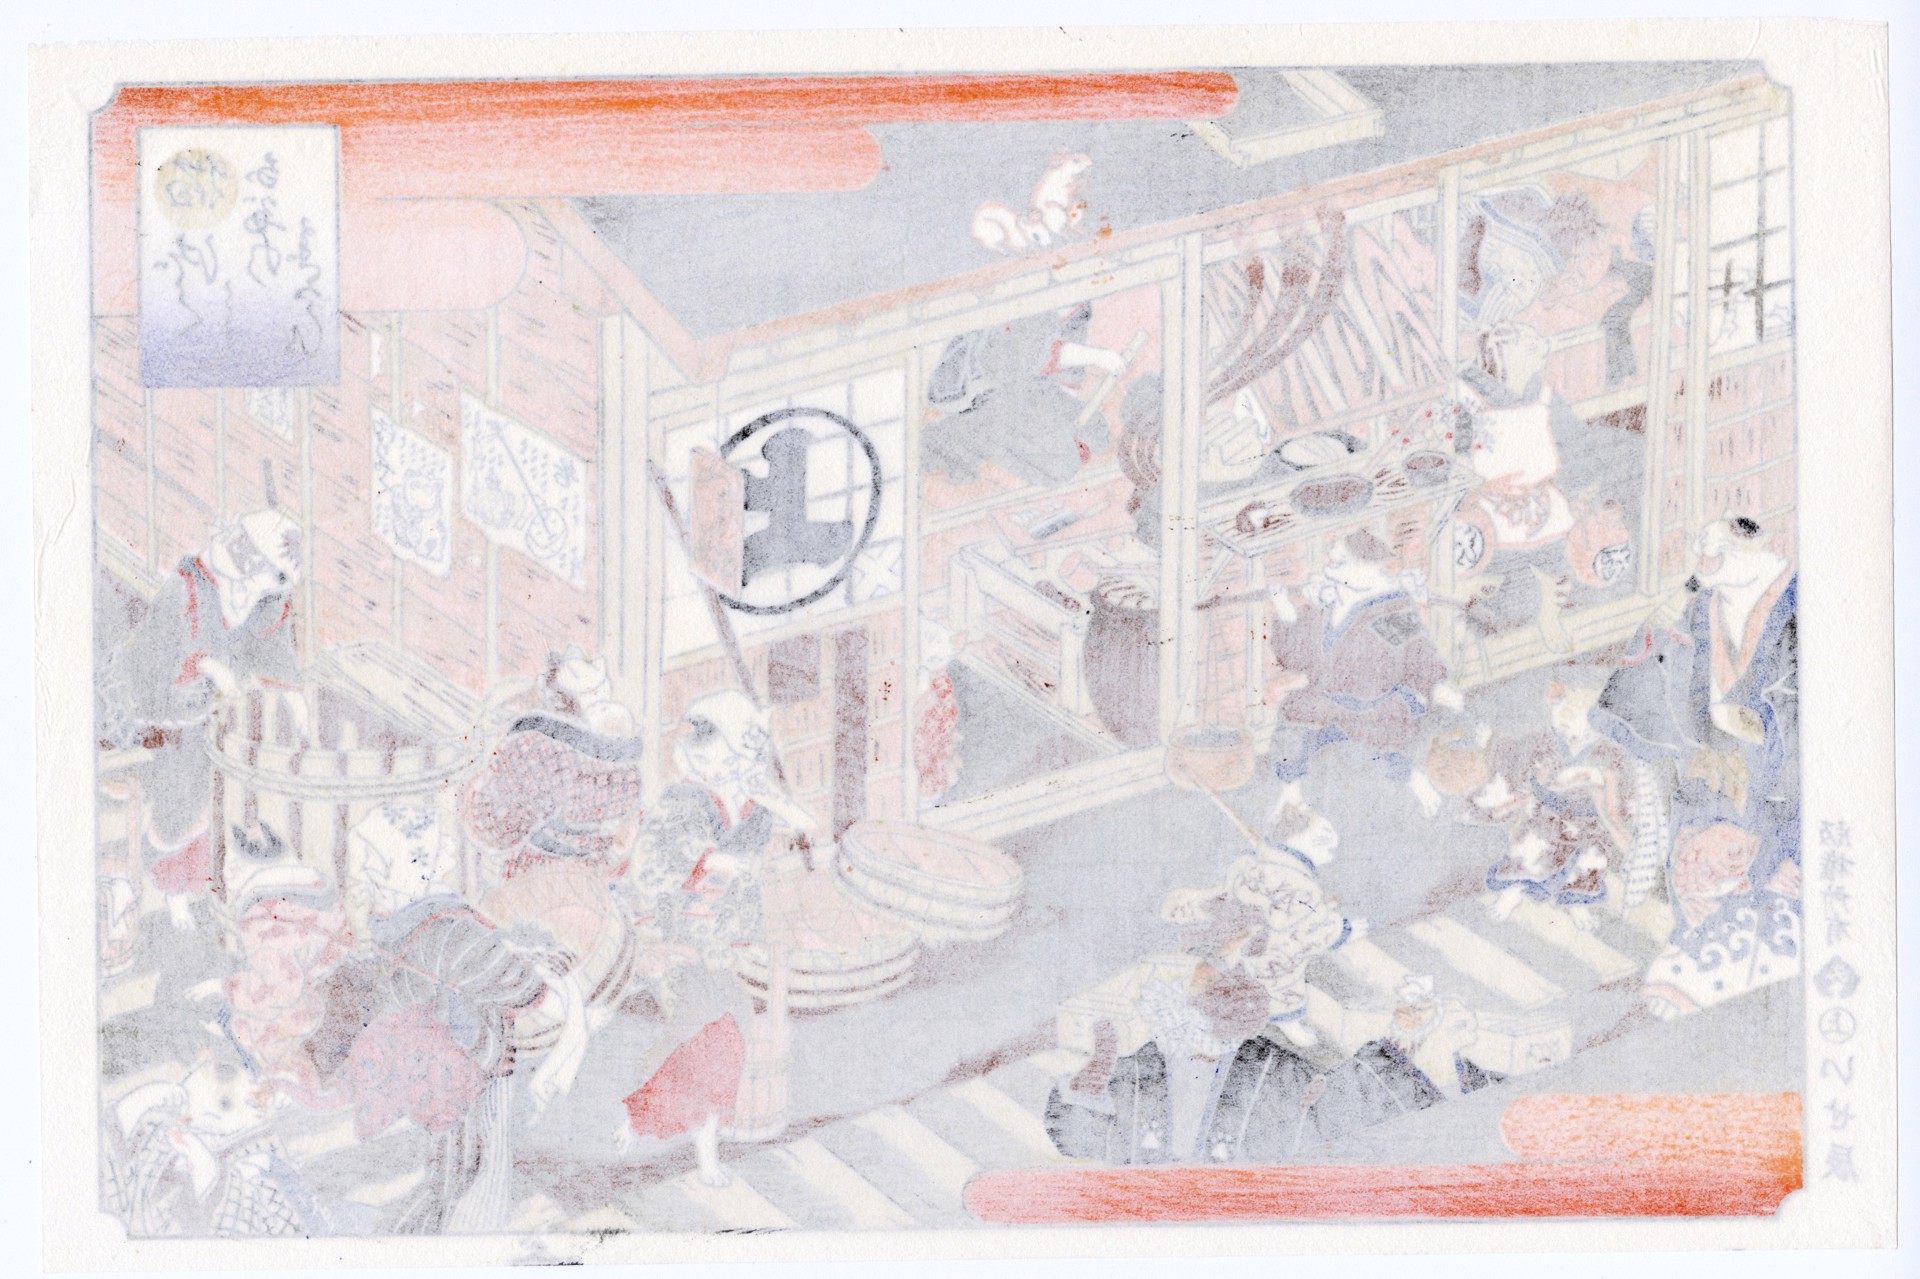 The Lively life of an Edo Period Tenement House Portrayed by Cats by Unsigned